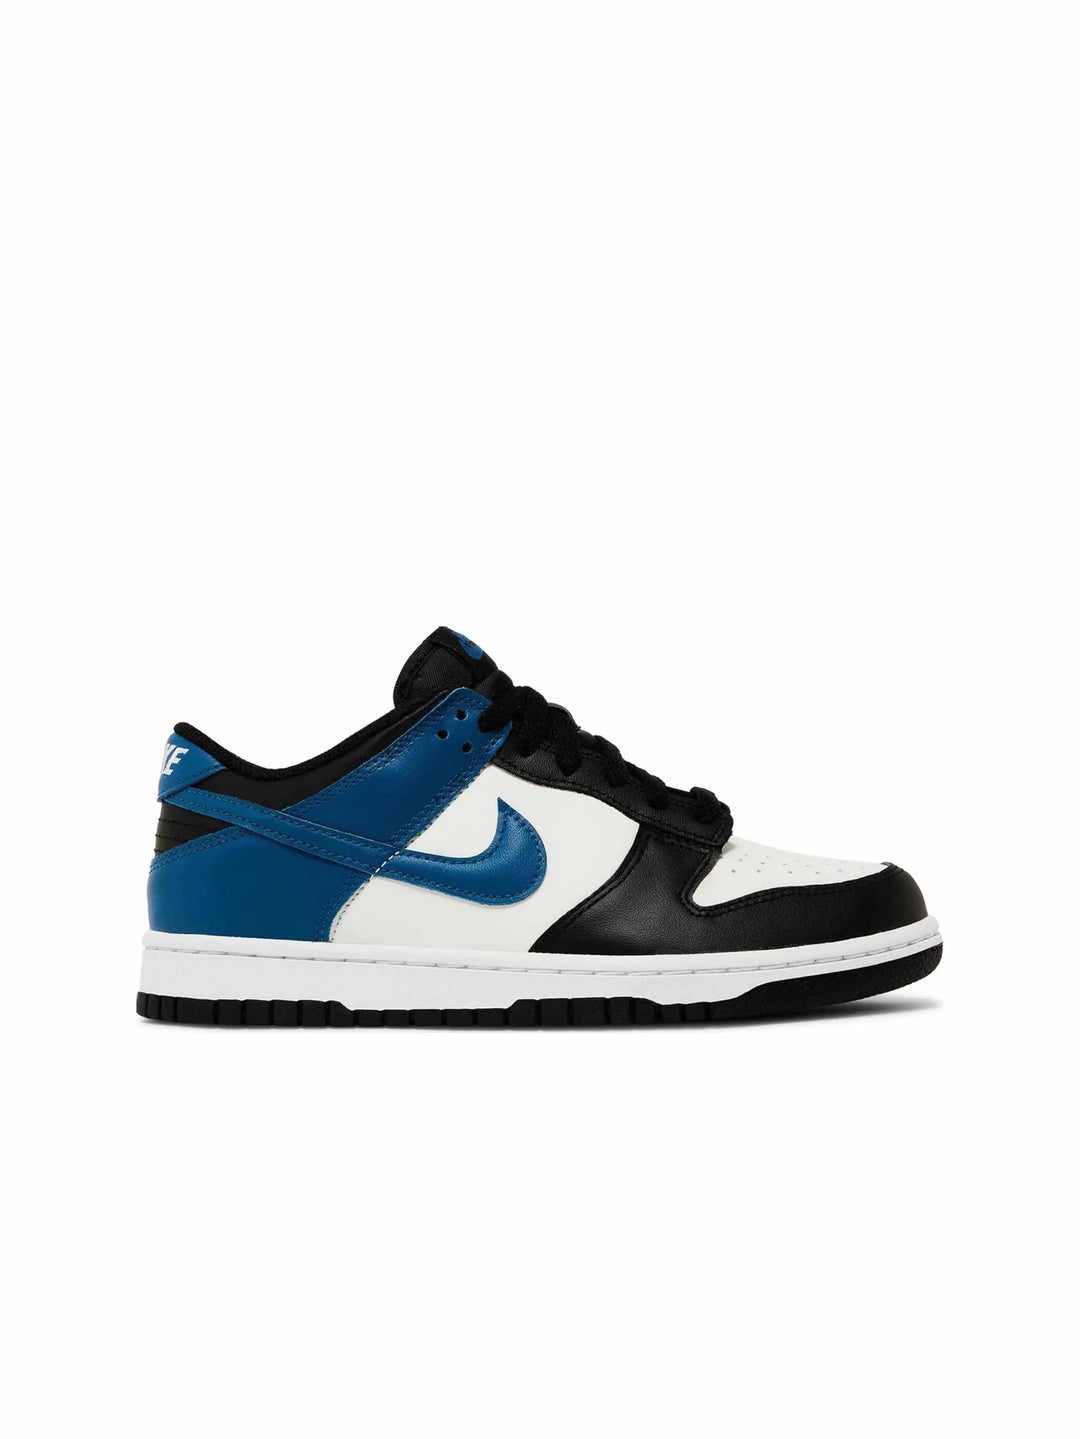 Nike Dunk Low Industrial Blue (GS) in Auckland, New Zealand - Shop name